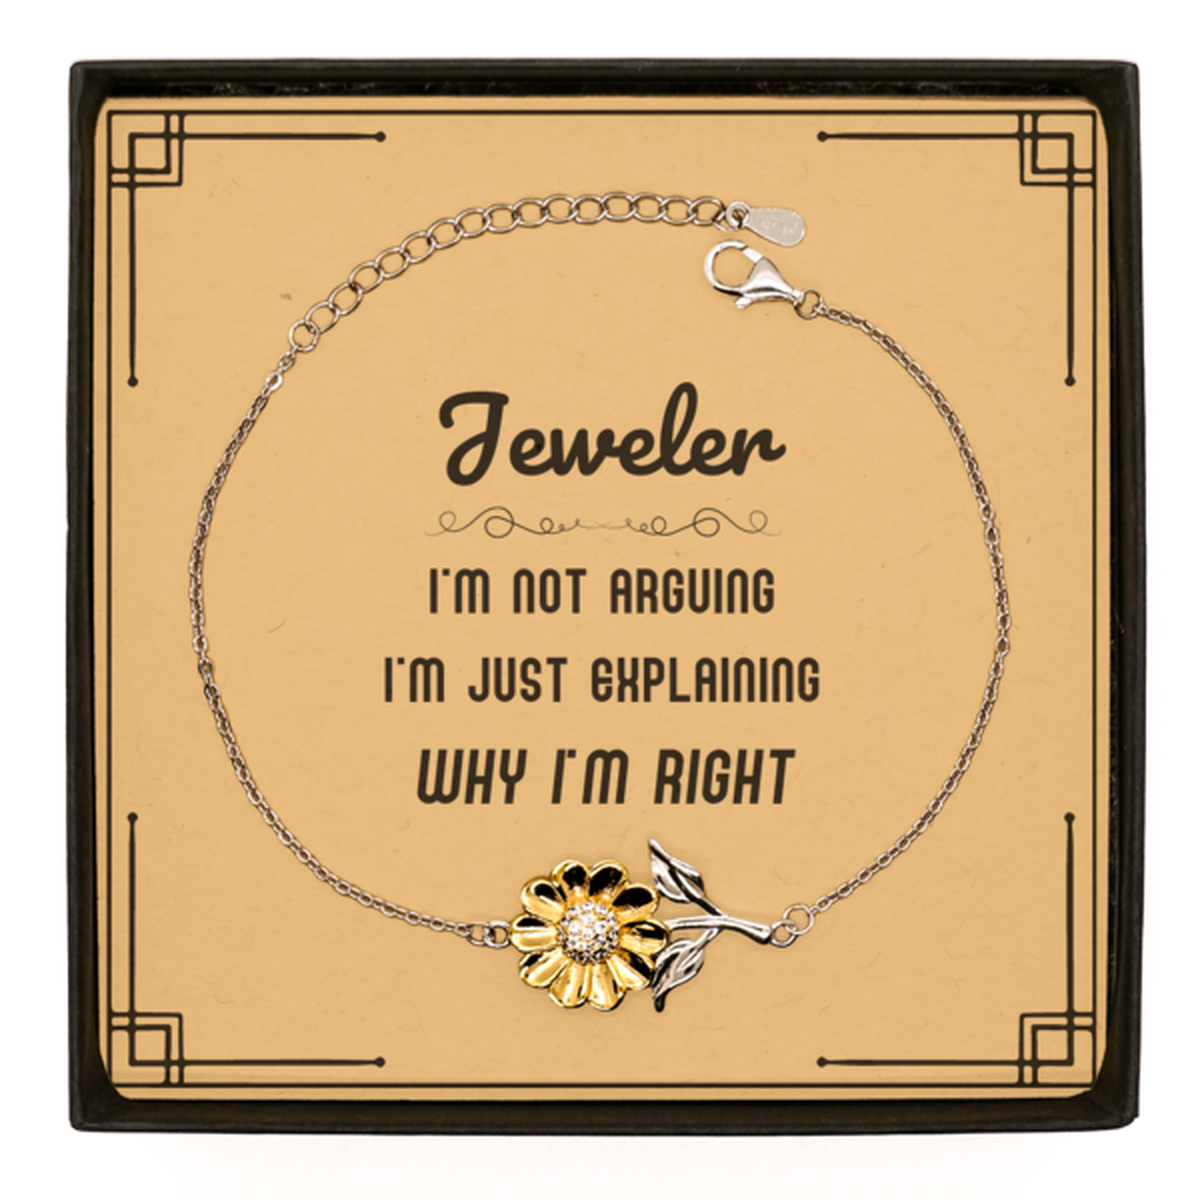 Jeweler I'm not Arguing. I'm Just Explaining Why I'm RIGHT Sunflower Bracelet, Funny Saying Quote Jeweler Gifts For Jeweler Message Card Graduation Birthday Christmas Gifts for Men Women Coworker